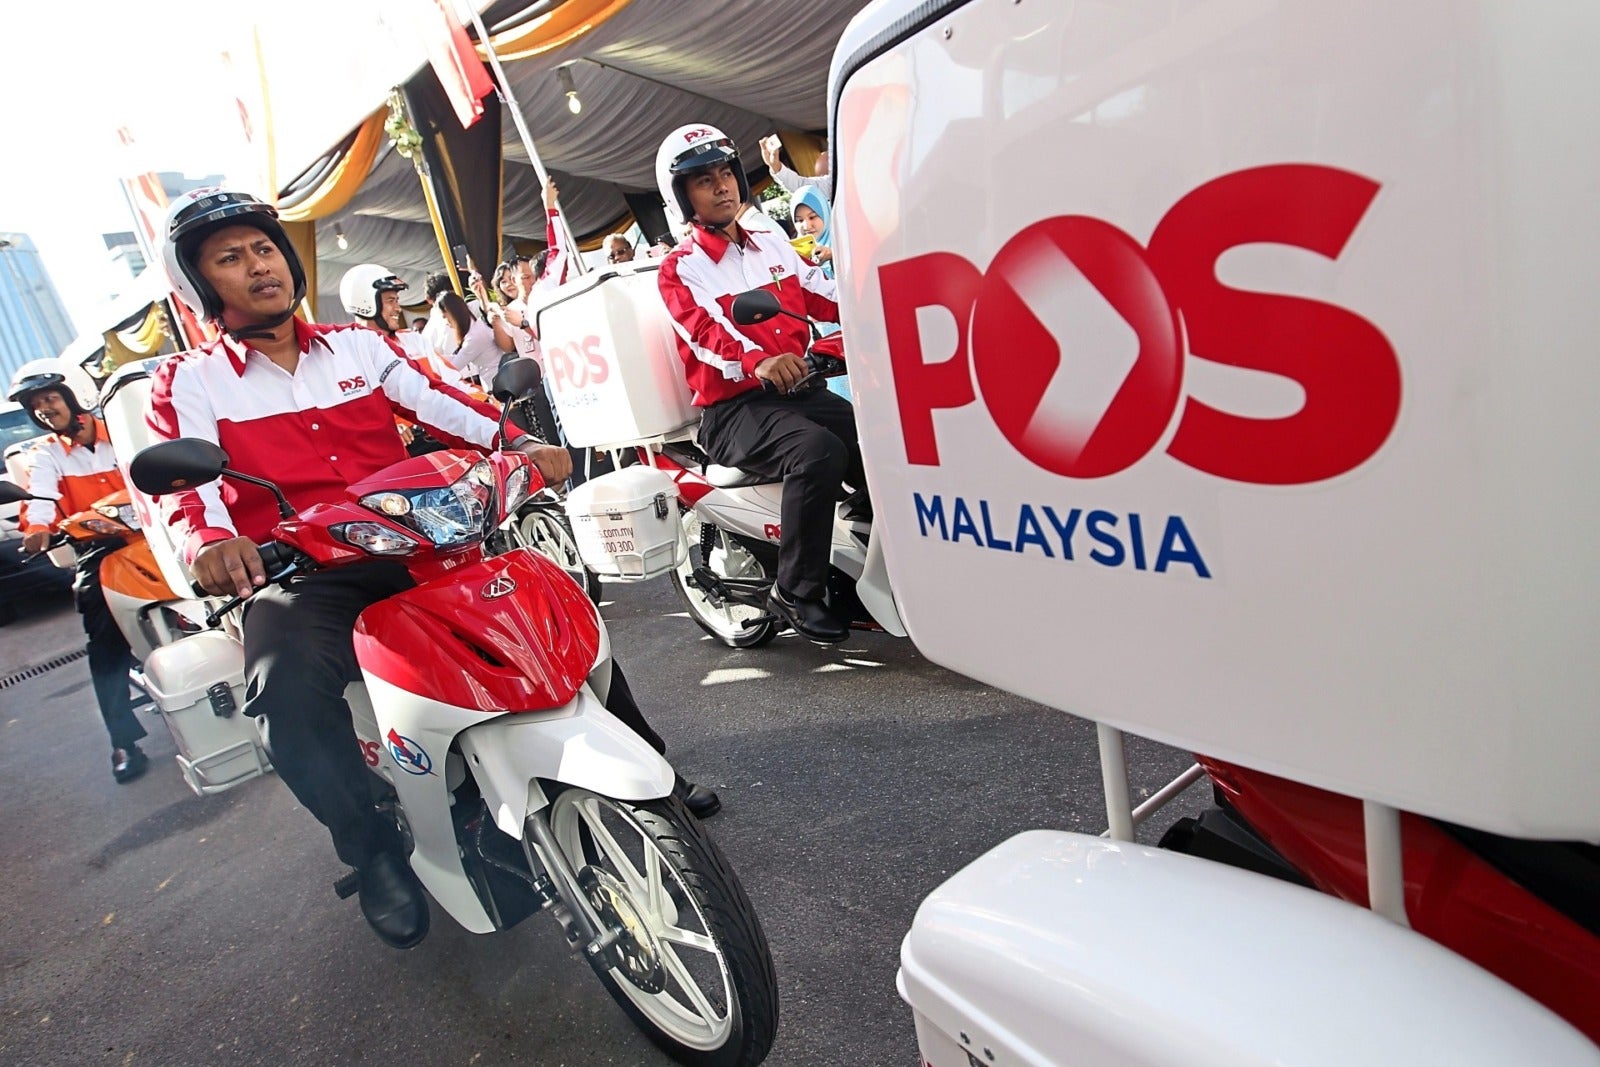 Pos Malaysia Is Stopping Delivery For International Mail And Parcels Until Further Notice - WORLD OF BUZZ 1